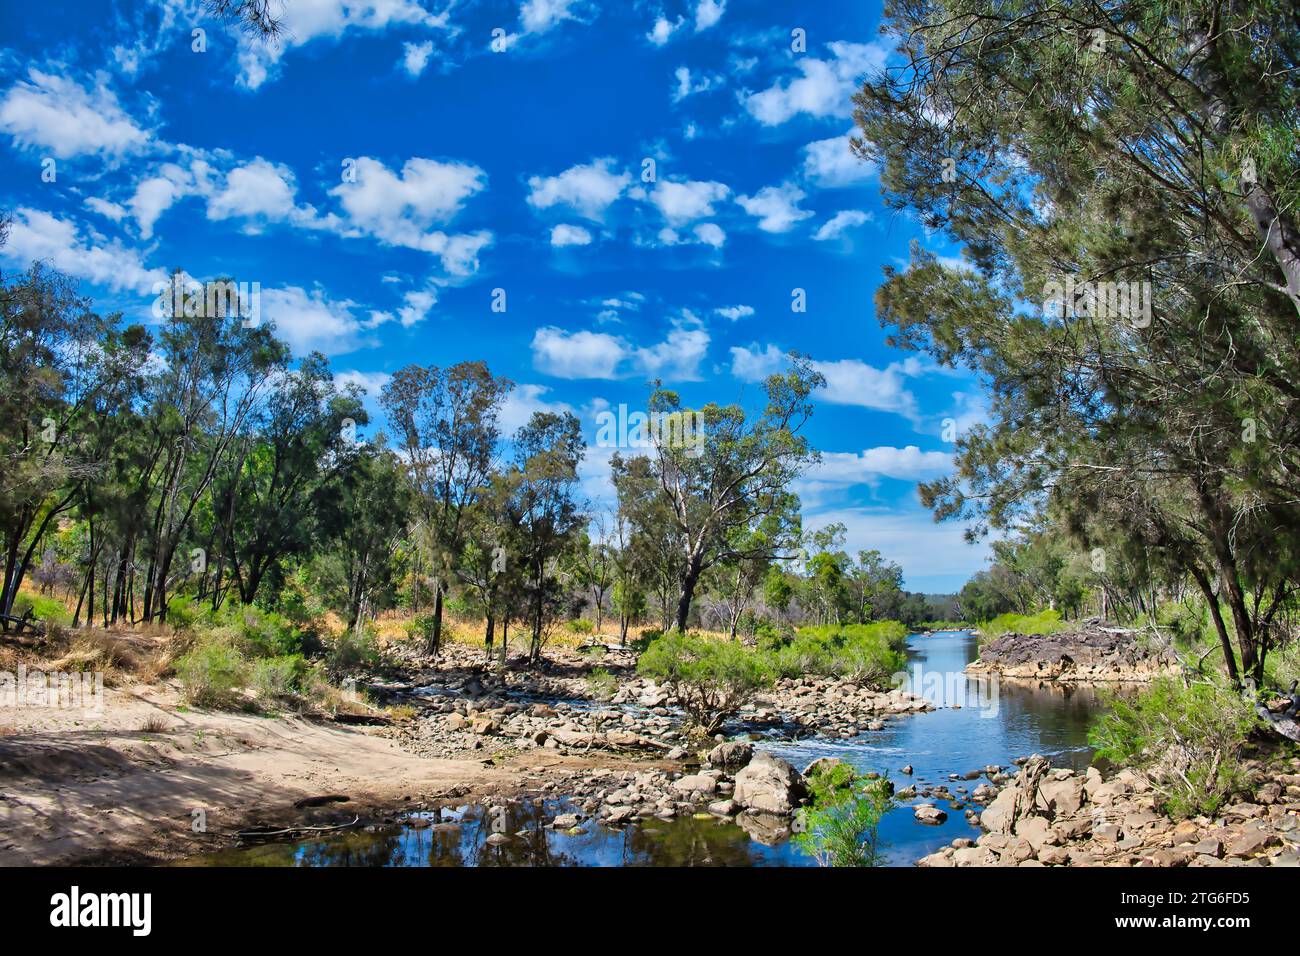 The peaceful Avon River flowing through the forest of Walyunga National Park, Western Australia, close to Perth. Stock Photo